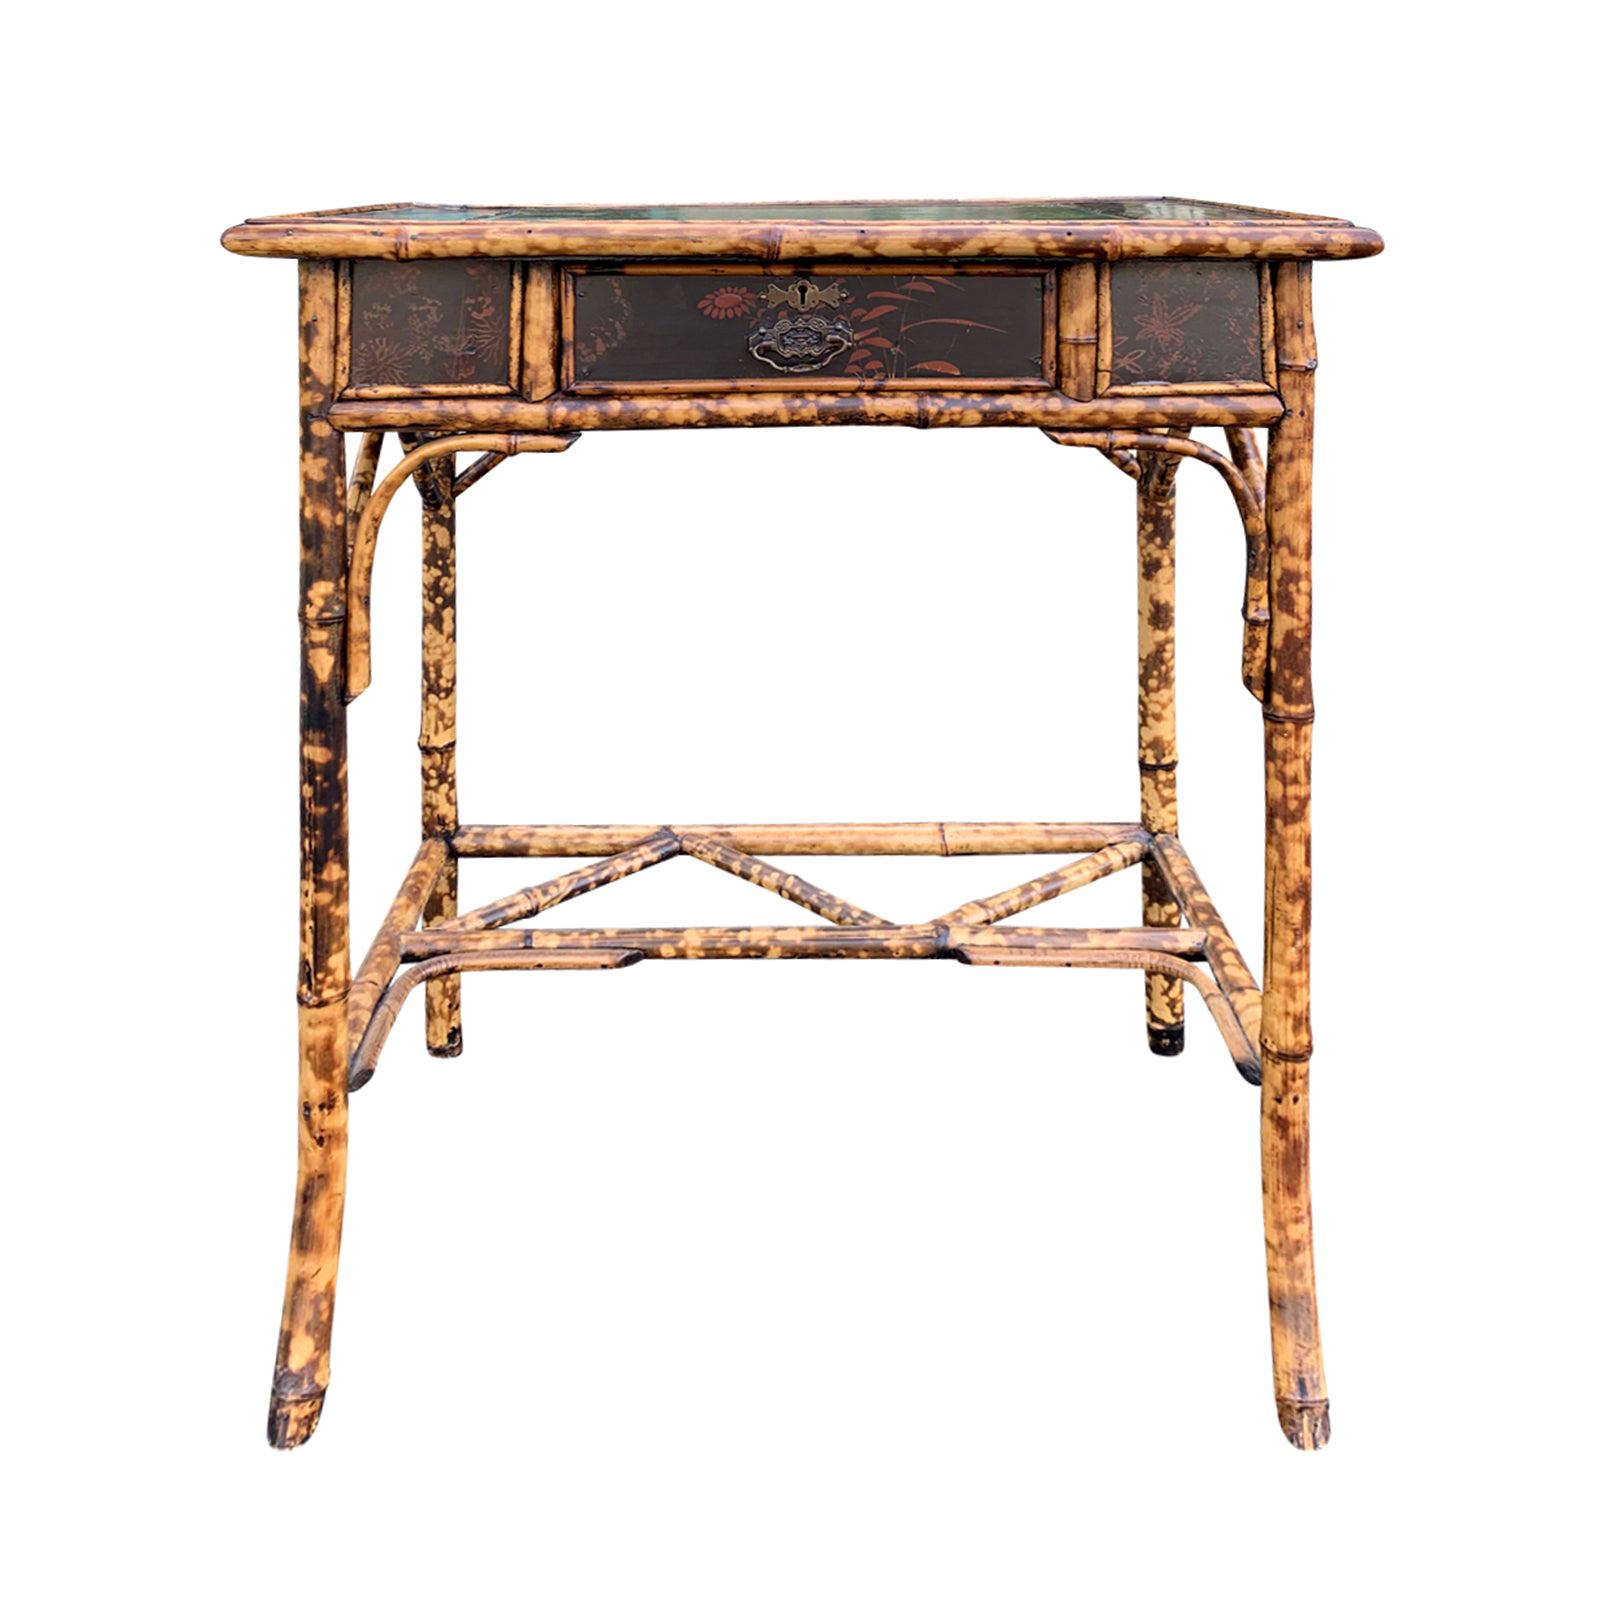 Late 19th-Early 20th Century Bamboo Table with Drawer, Leather Top, circa 1900